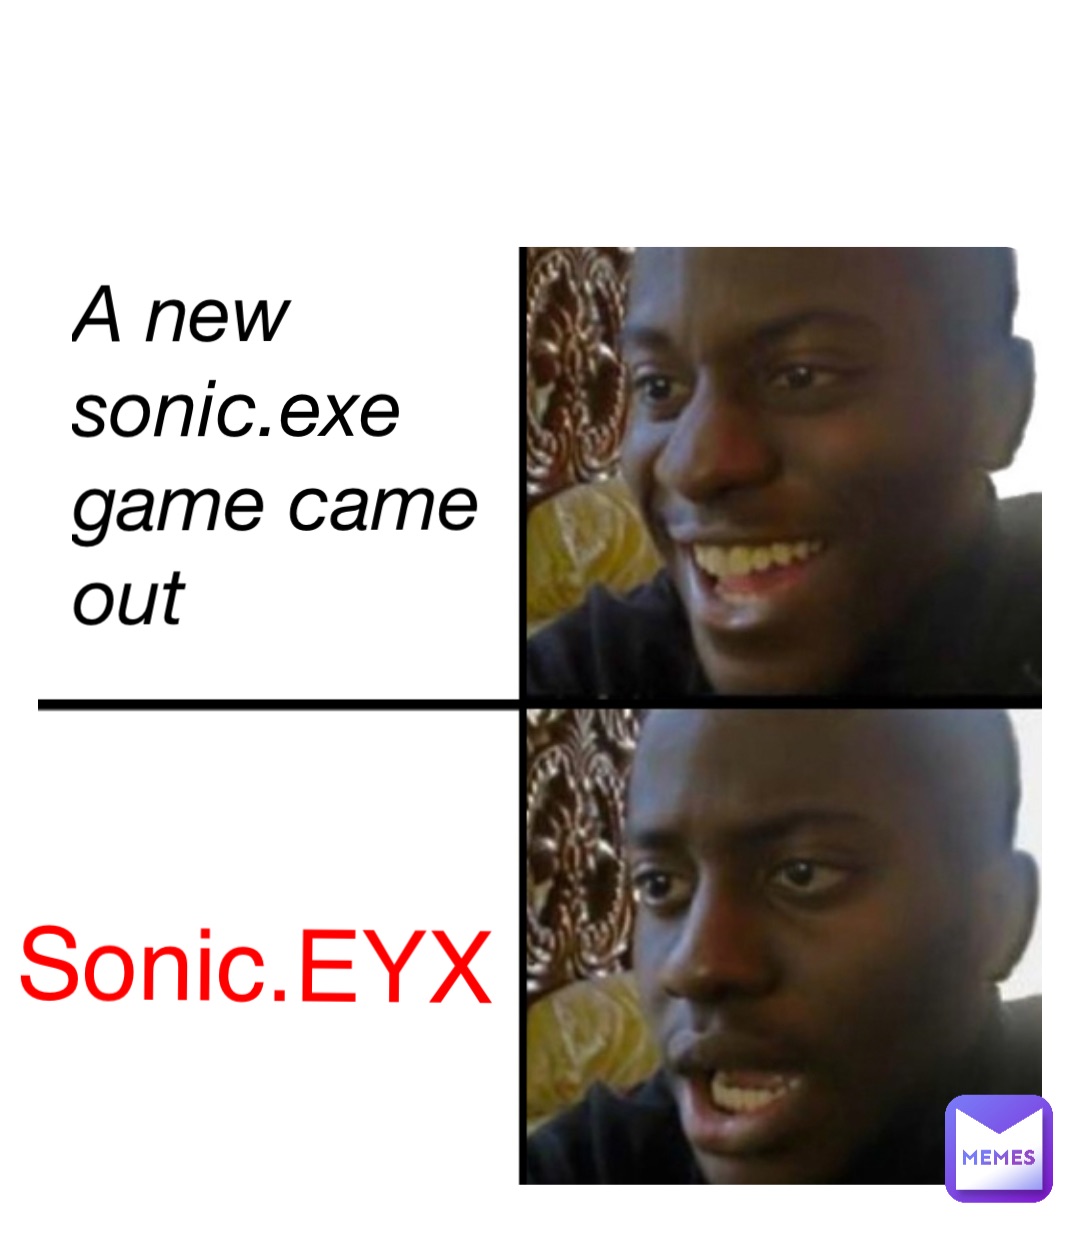 A new sonic.exe game came out Sonic.EYX